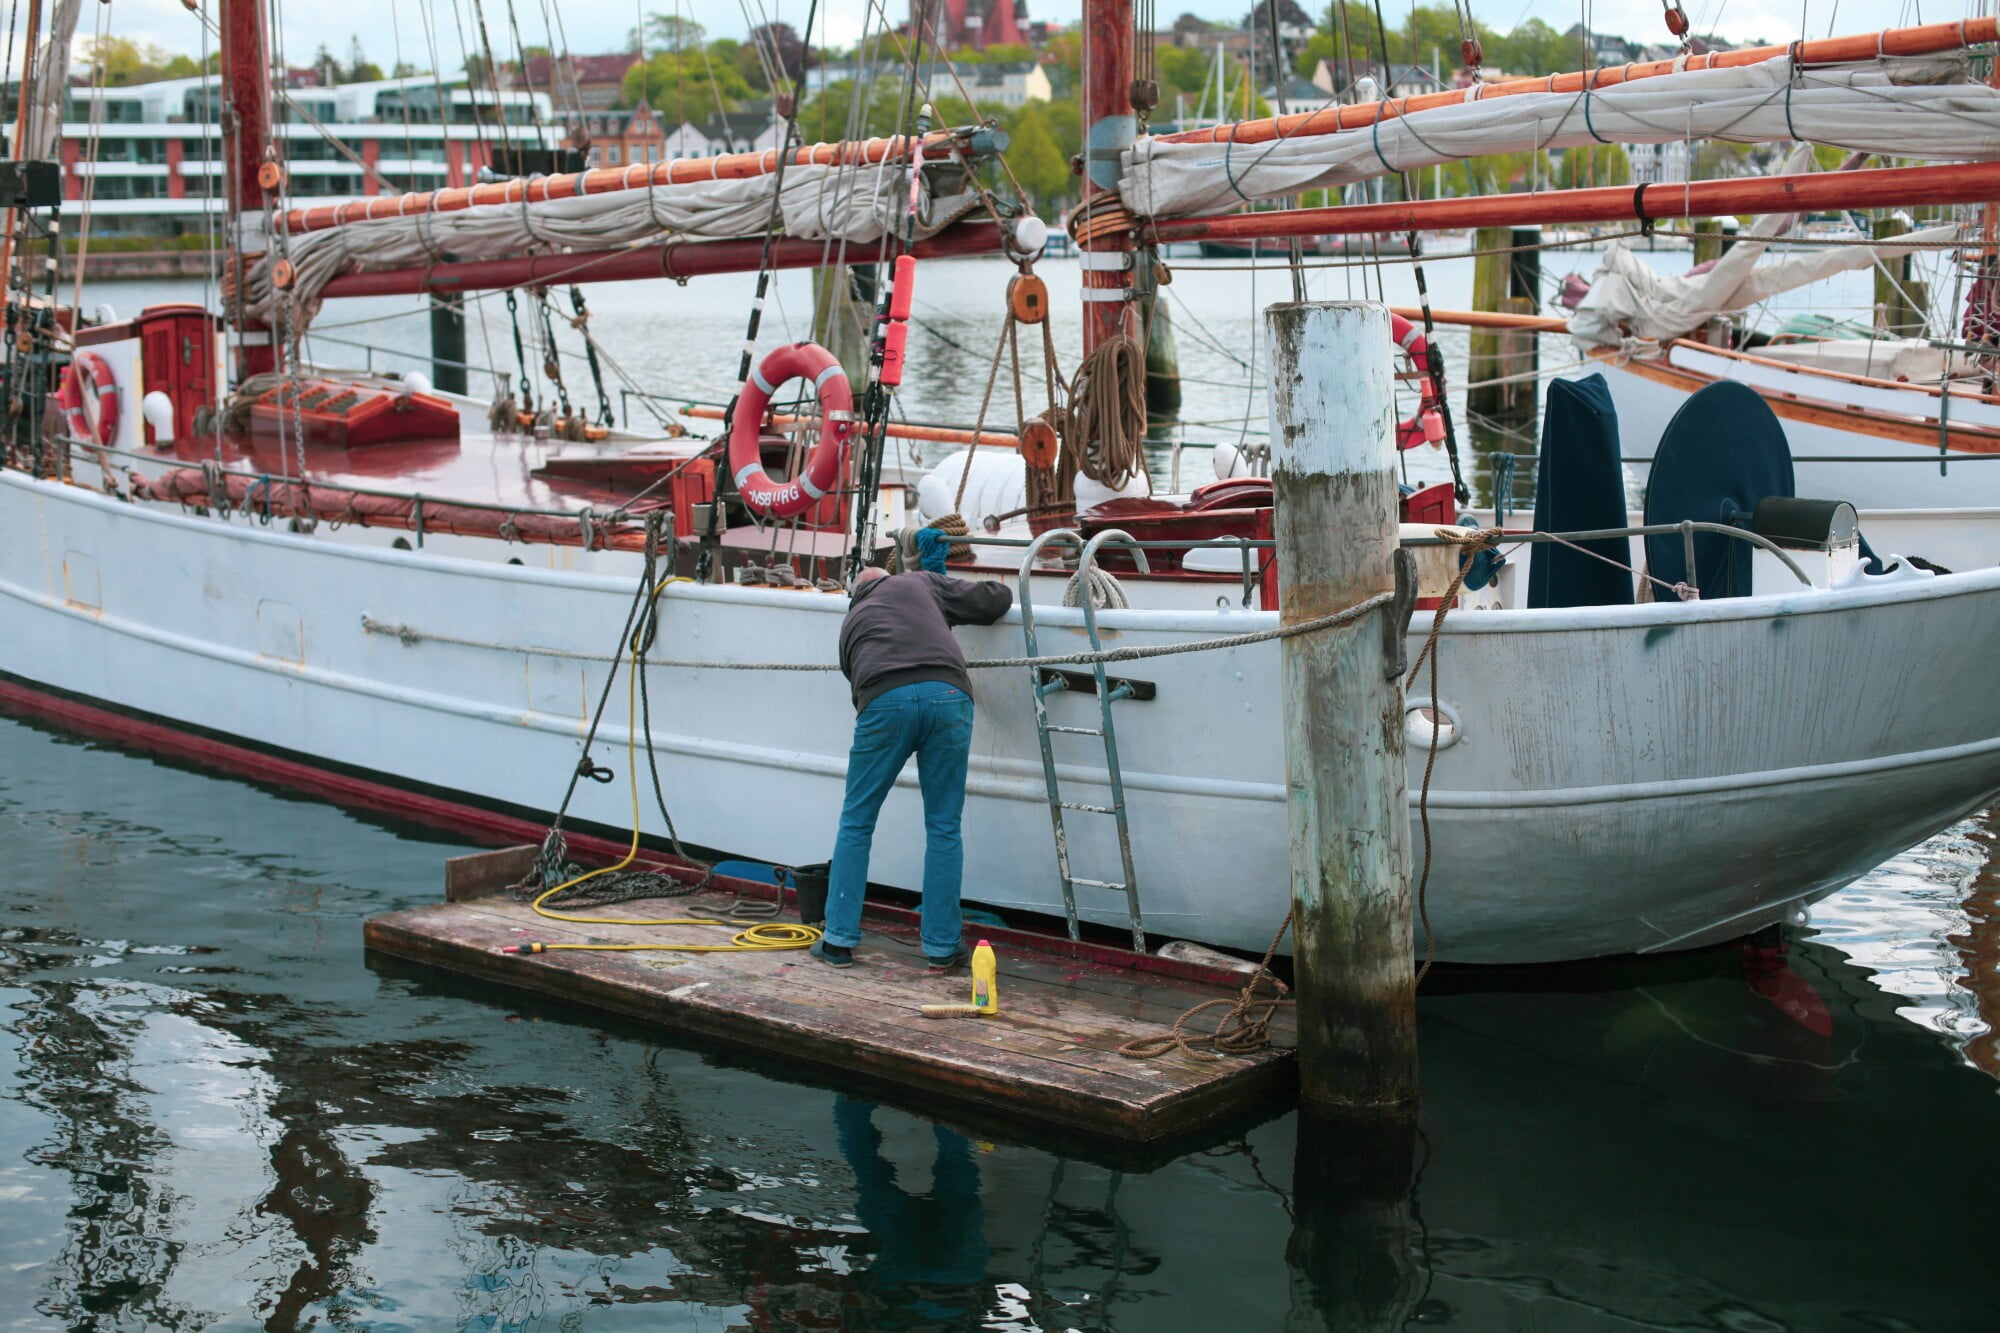 Making sure your boat is well-maintained is key for safety resale value. We take a look at predicting your boat maintenance cost.